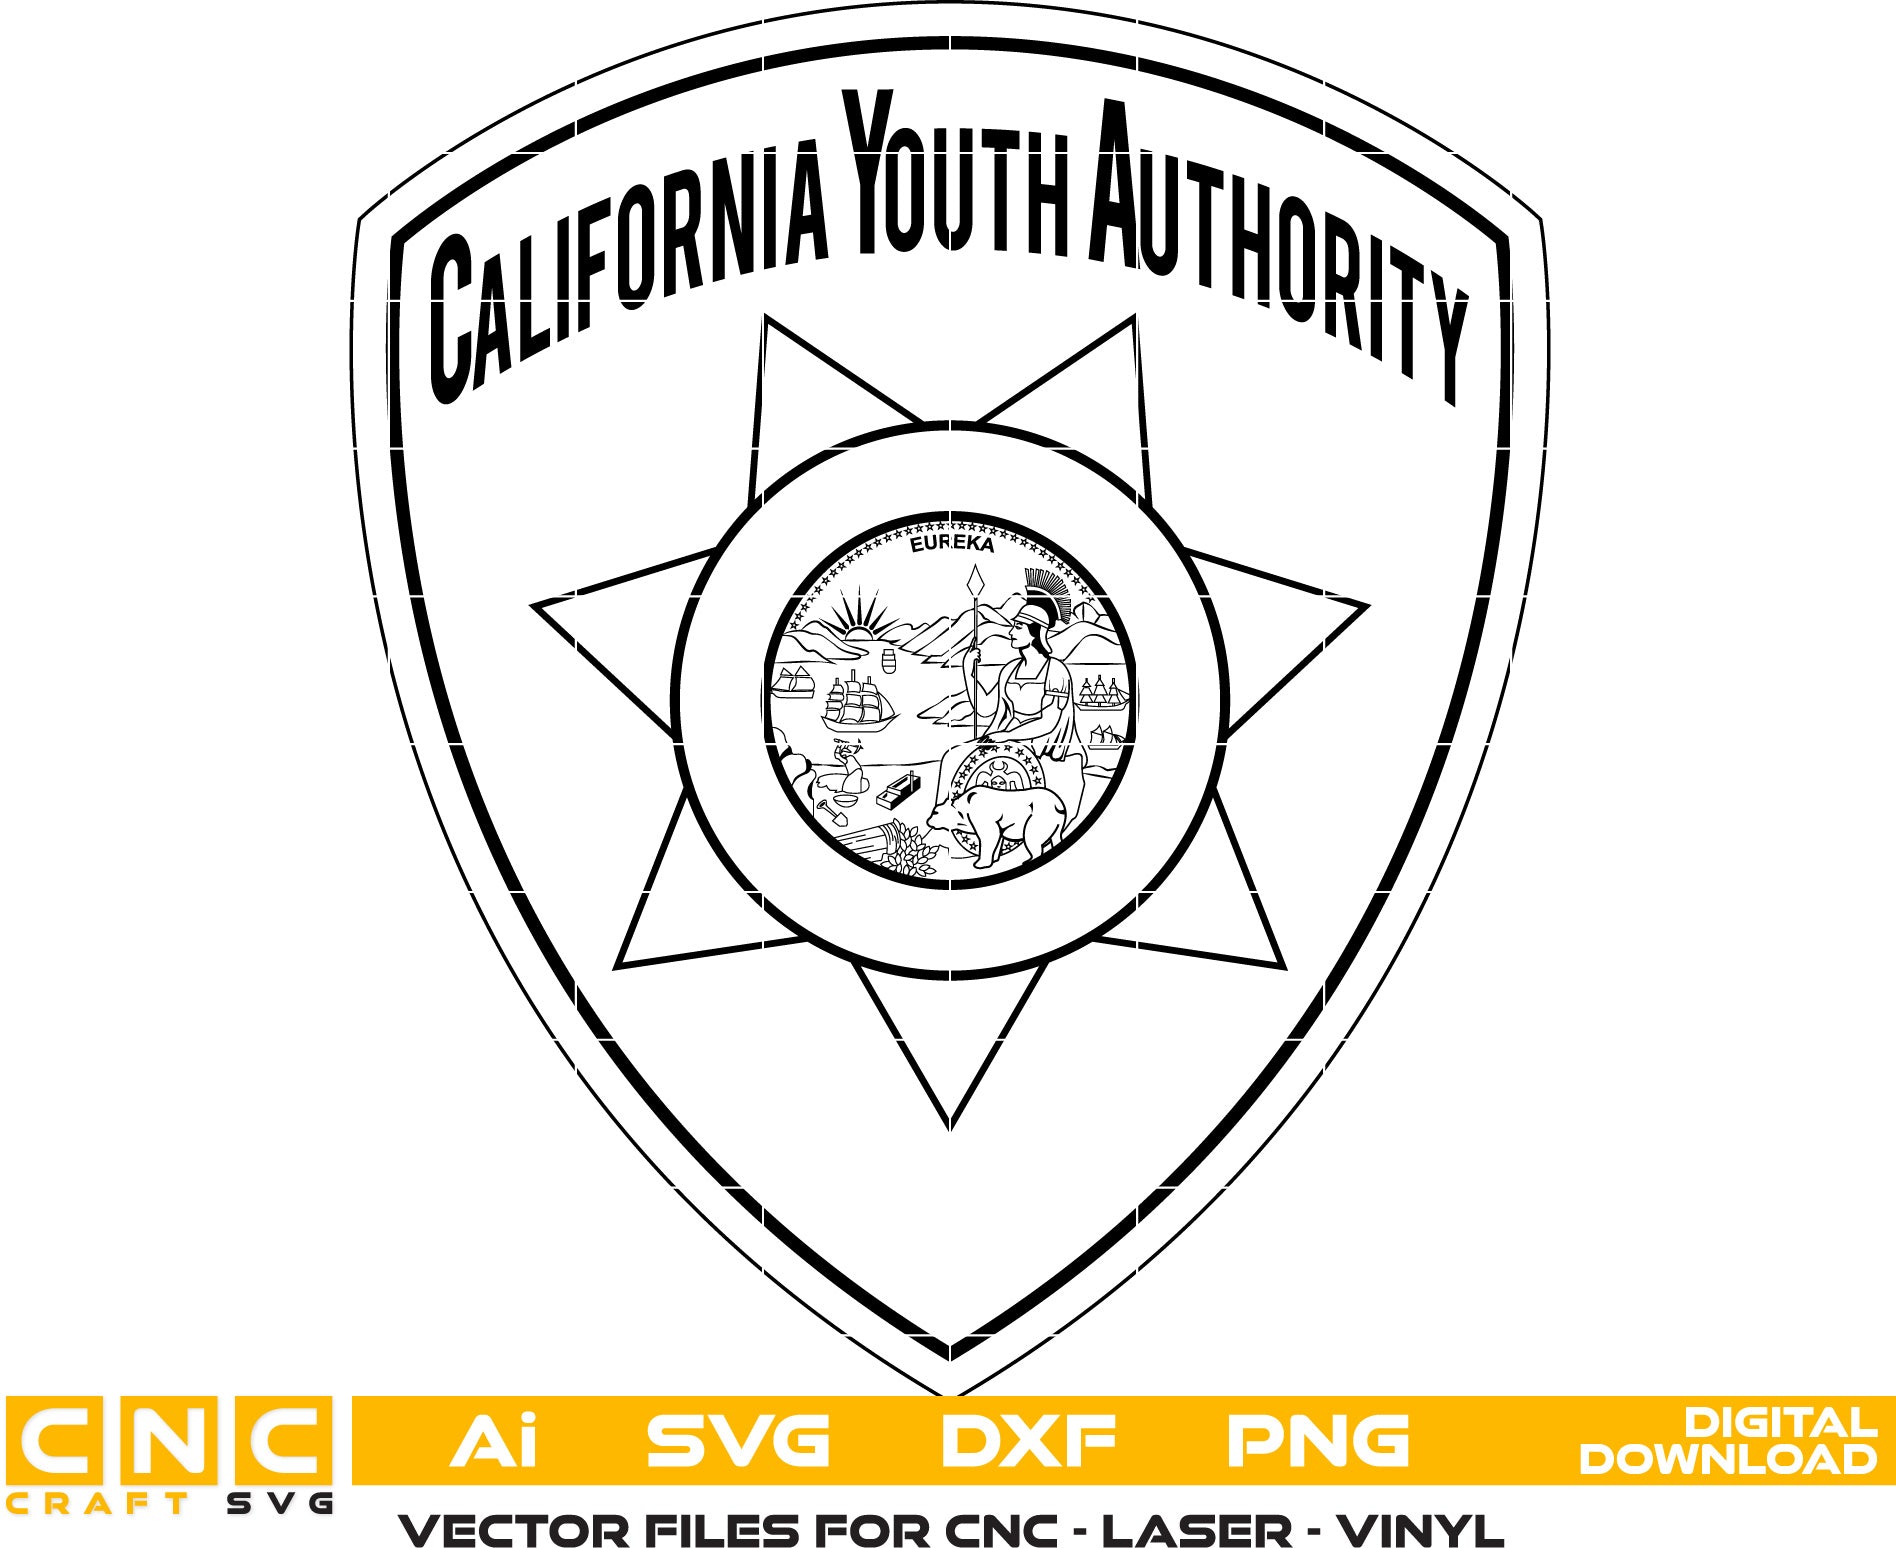 California Youth Authority Logo Vector Art, Ai,SVG, DXF, PNG, Digital Files for Laser Engraving, Woodworking & Printing